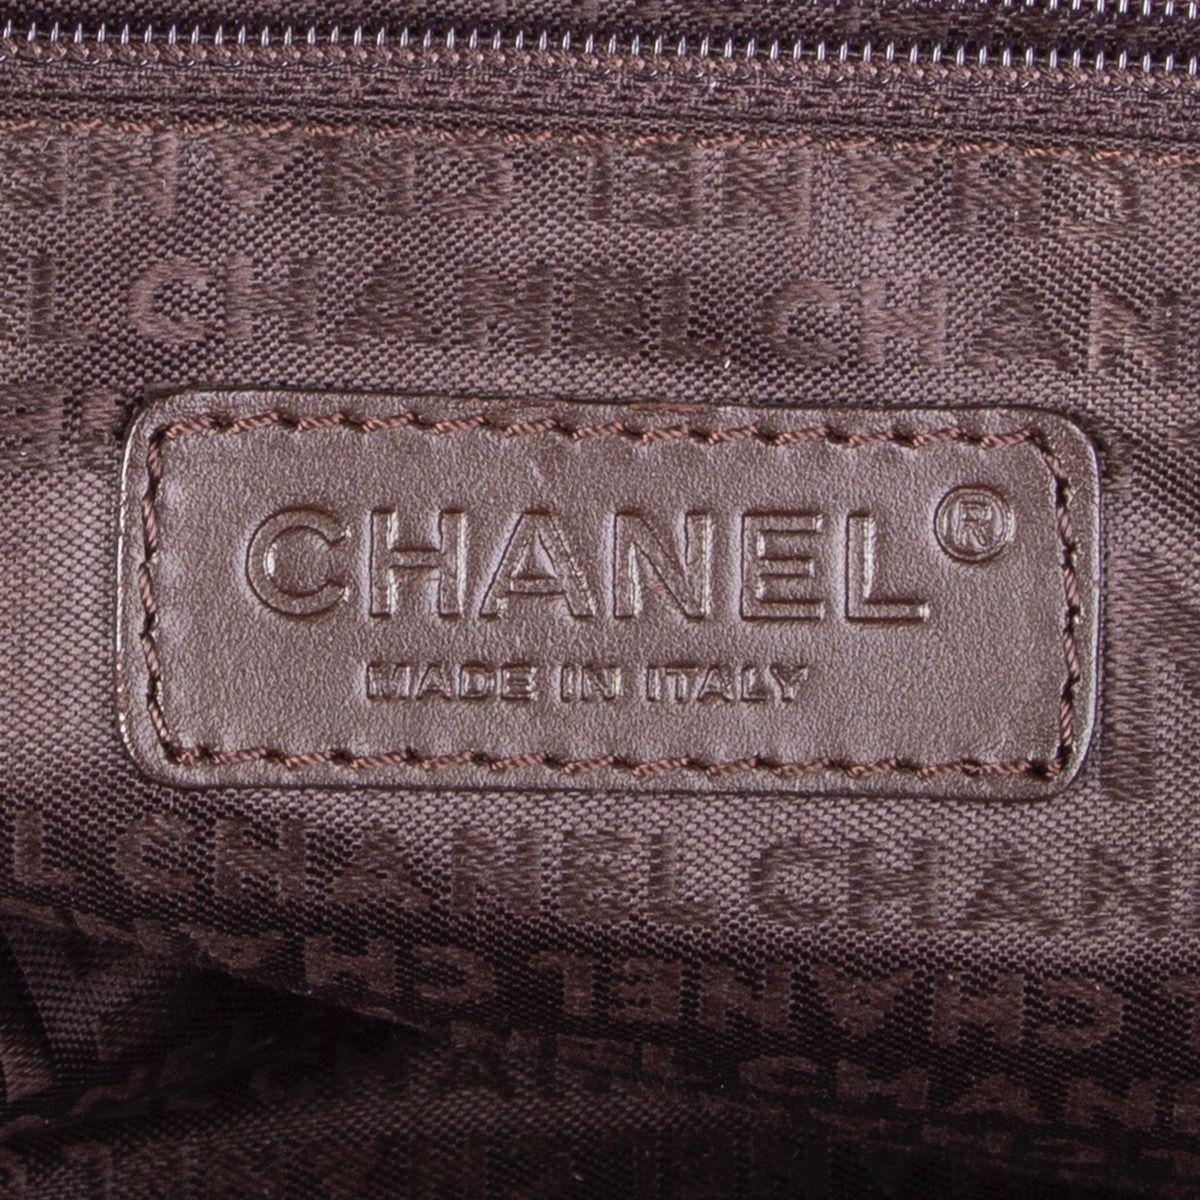 CHANEL brown SQUARE QUILTED leather SMALL BOWLER Shoulder Bag 2